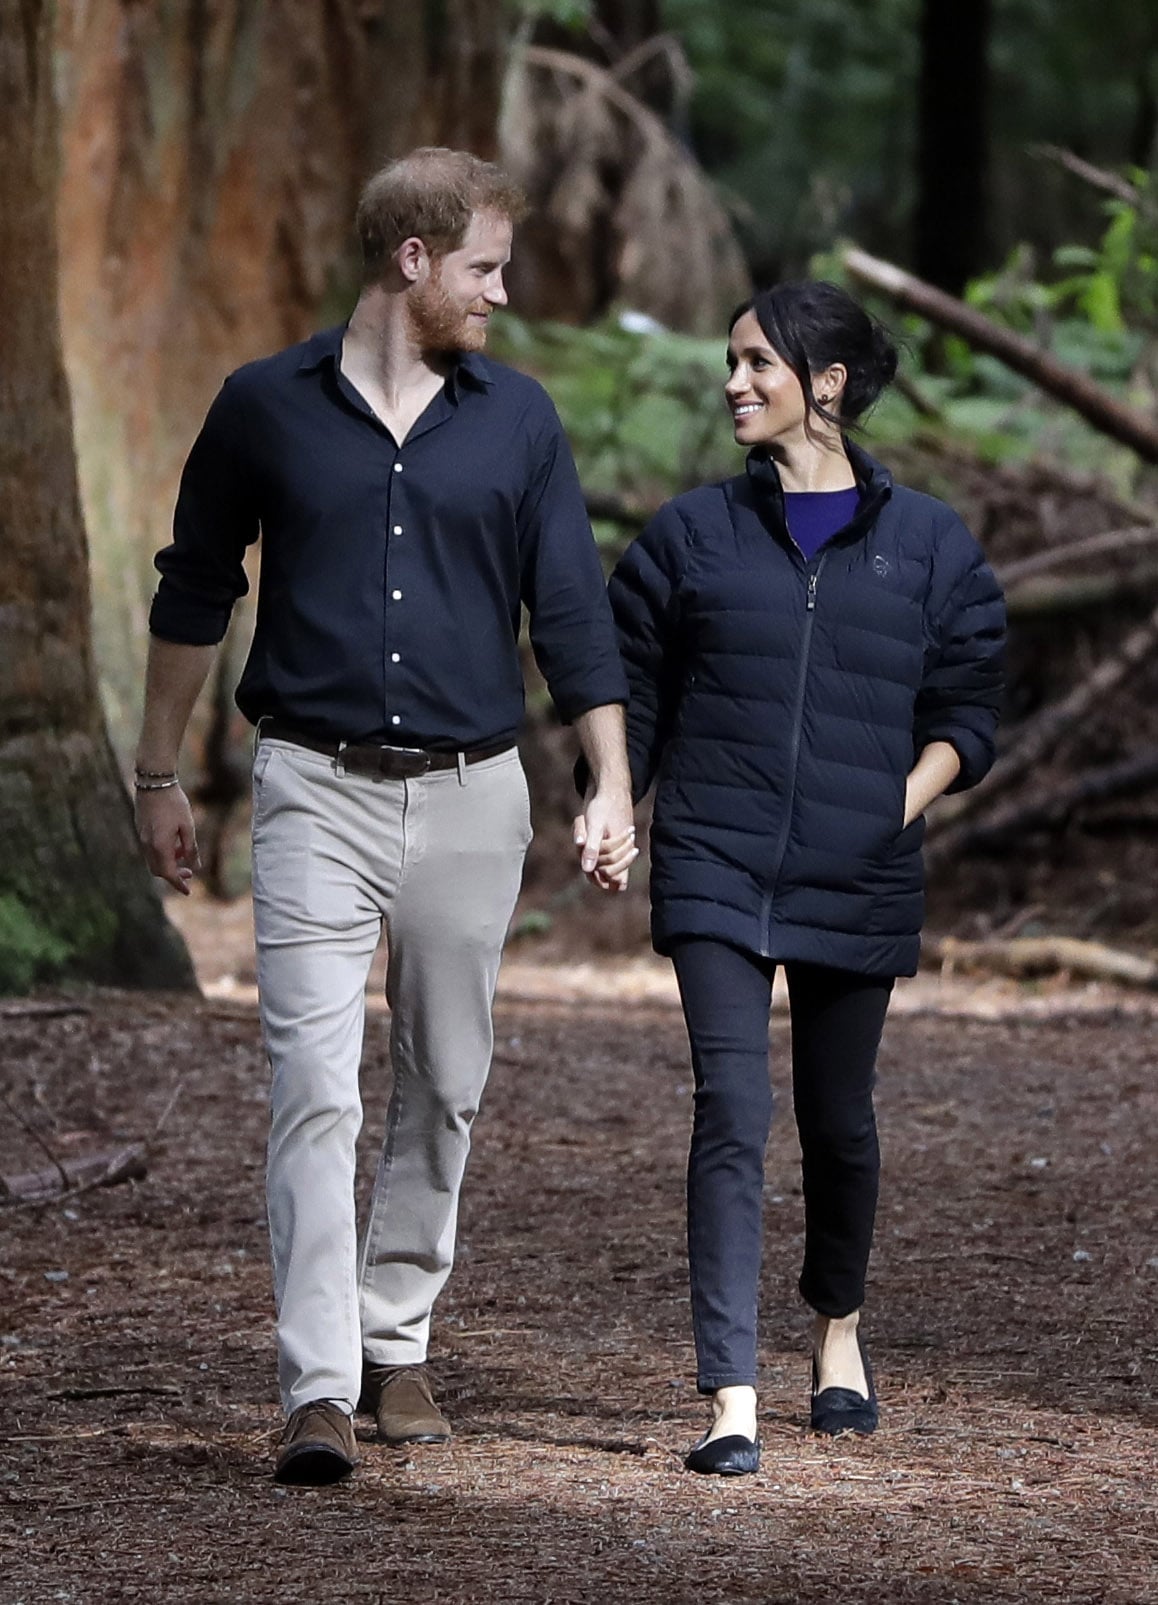 ROTORUA, NEW ZEALAND - OCTOBER 31: Prince Harry, Duke of Sussex and Meghan, Duchess of Sussex visit Redwoods Tree Walk on October 31, 2018 in Rotorua, New Zealand. The Duke and Duchess of Sussex are on the final day of their official 16-day Autumn tour visiting cities in Australia, Fiji, Tonga and New Zealand. (Photo by Kirsty Wigglesworth - Pool/Getty Images)